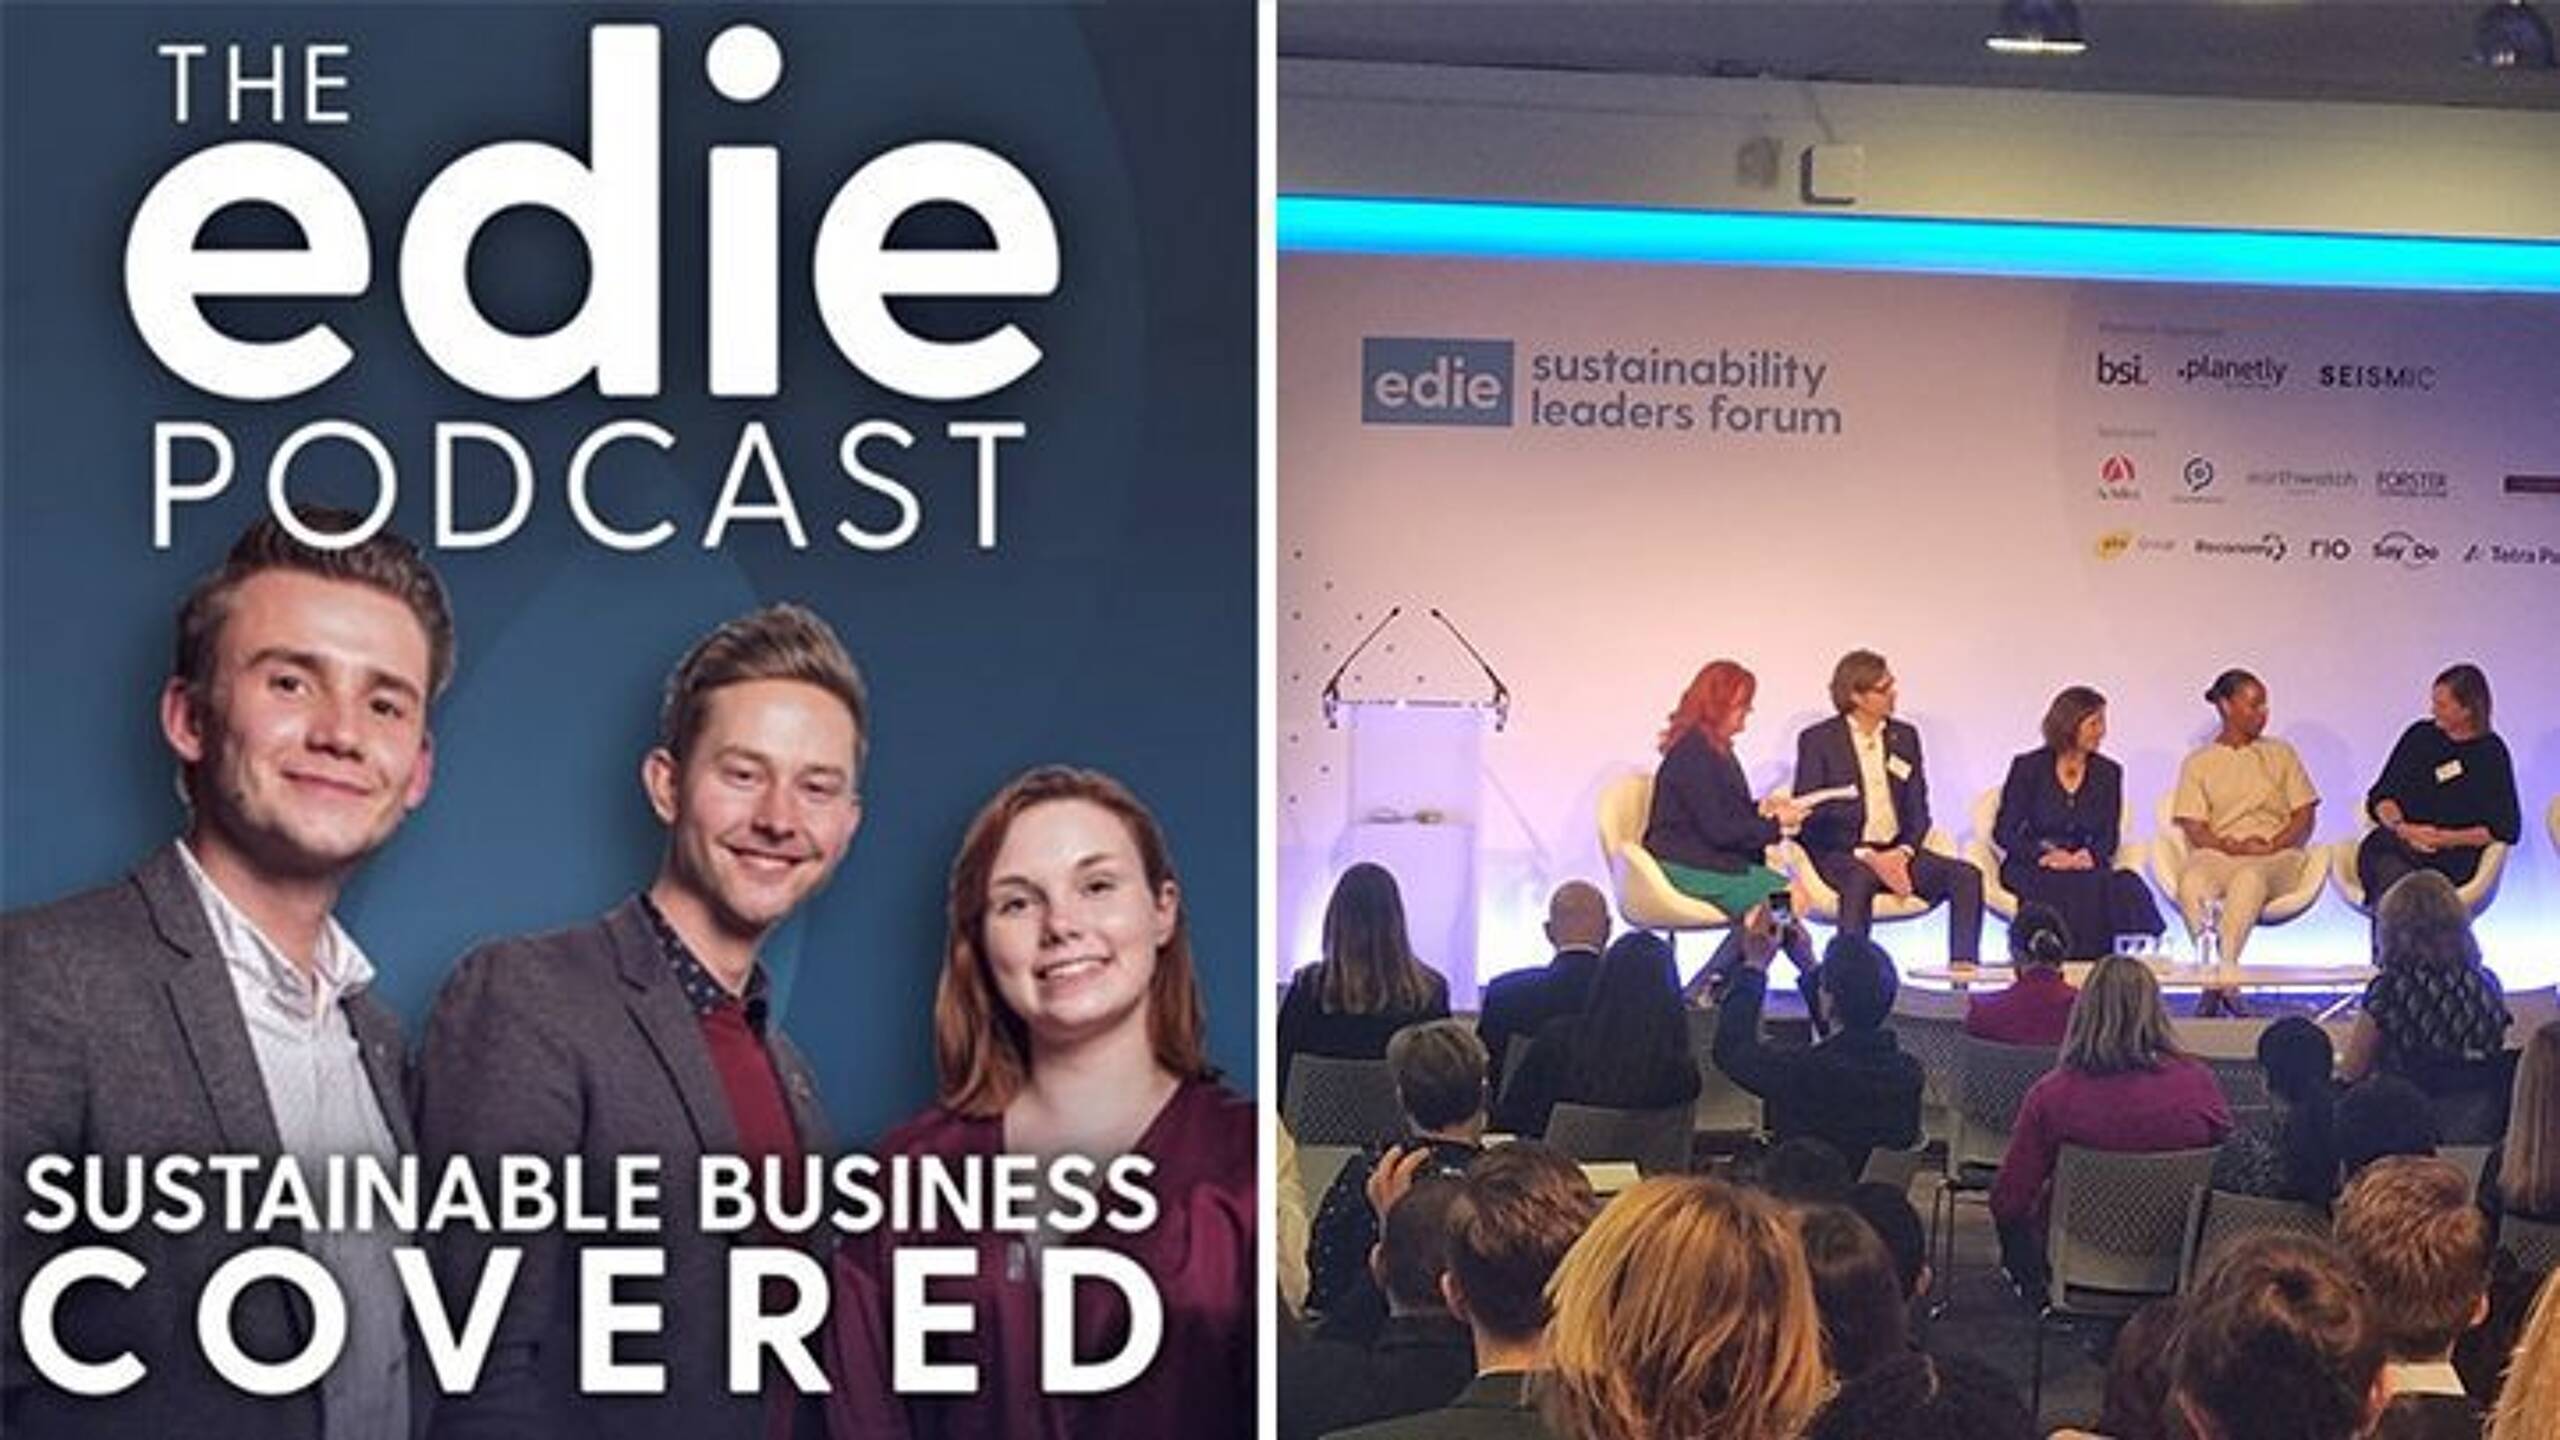 Sustainable Business Covered Podcast: Delivering transformational action at the Sustainability Leaders Forum (Part One)